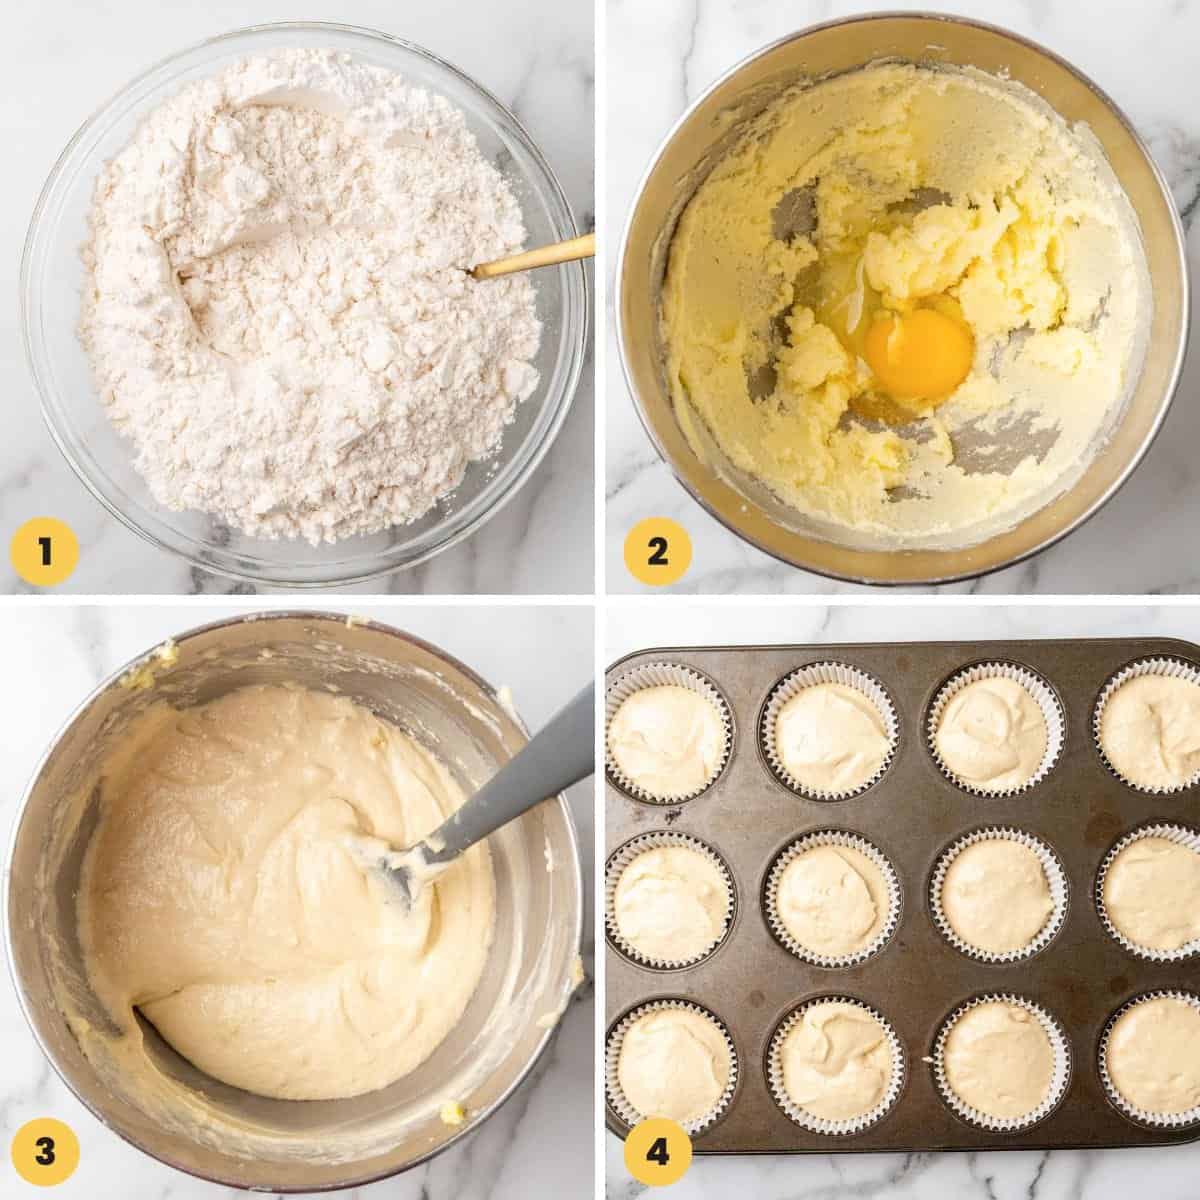 a collage of images showing steps to take to make vanilla cupcakes from scratch.